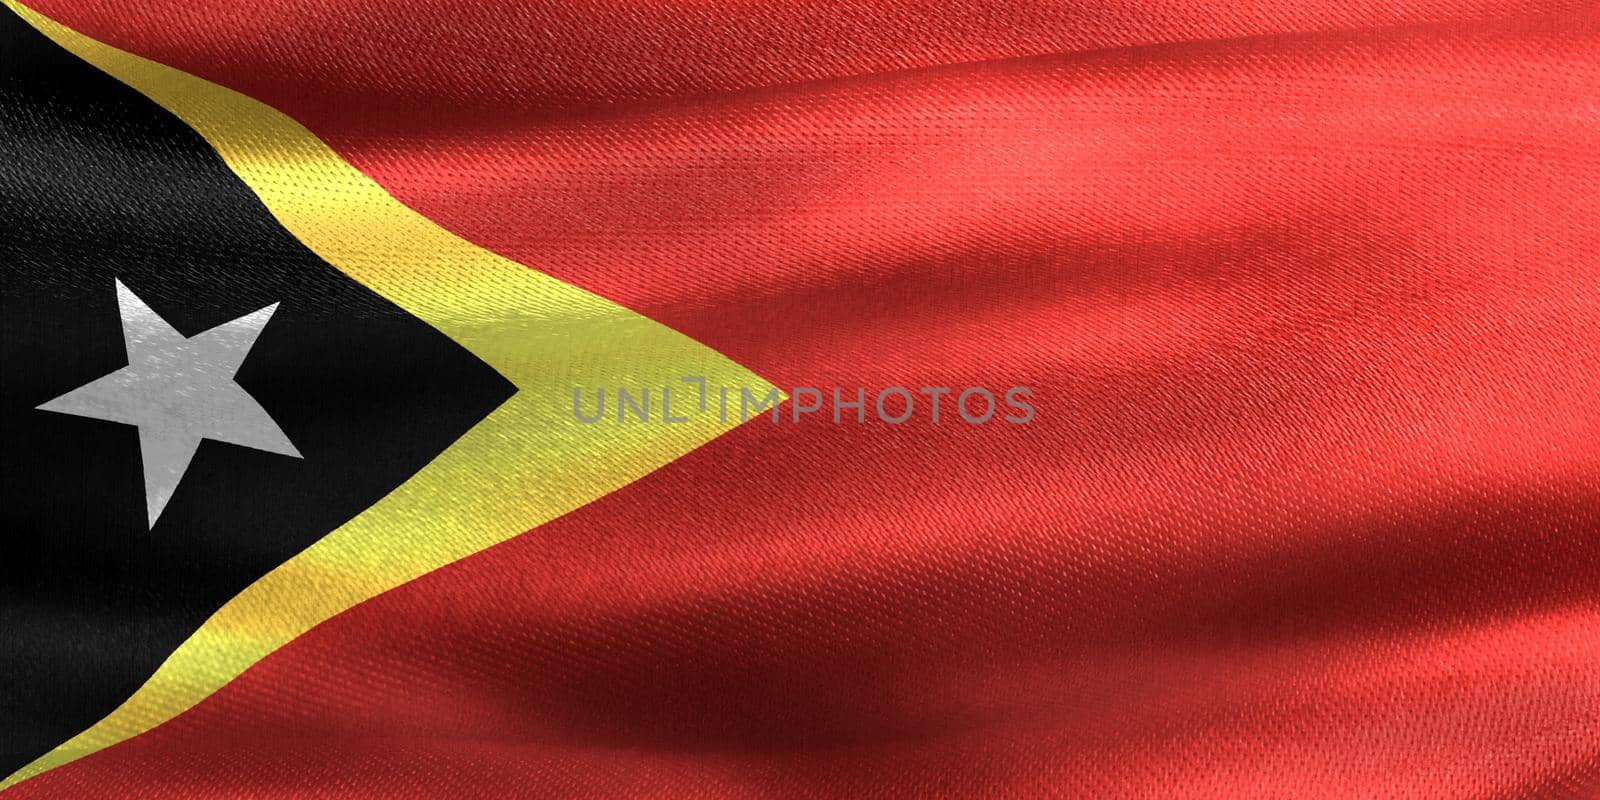 3D-Illustration of a East Timor flag - realistic waving fabric flag by MP_foto71